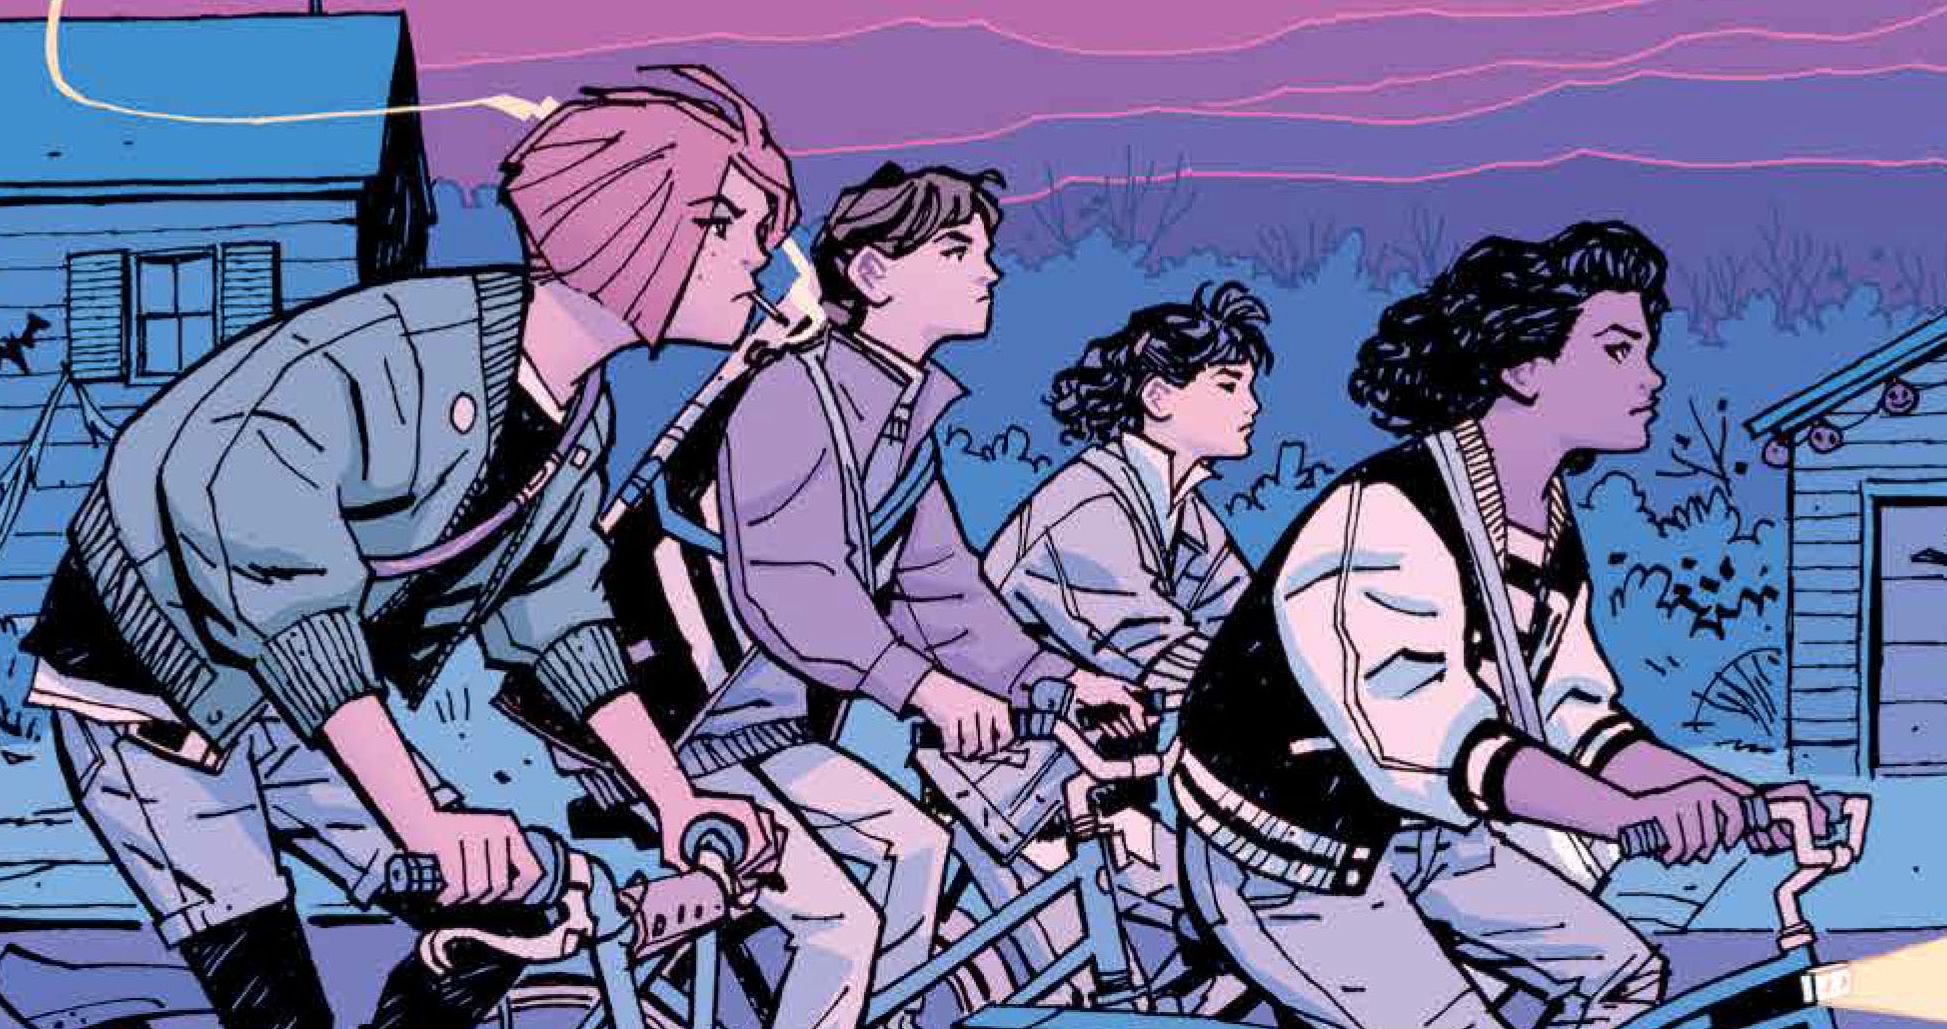 The paper girls ride their bikes